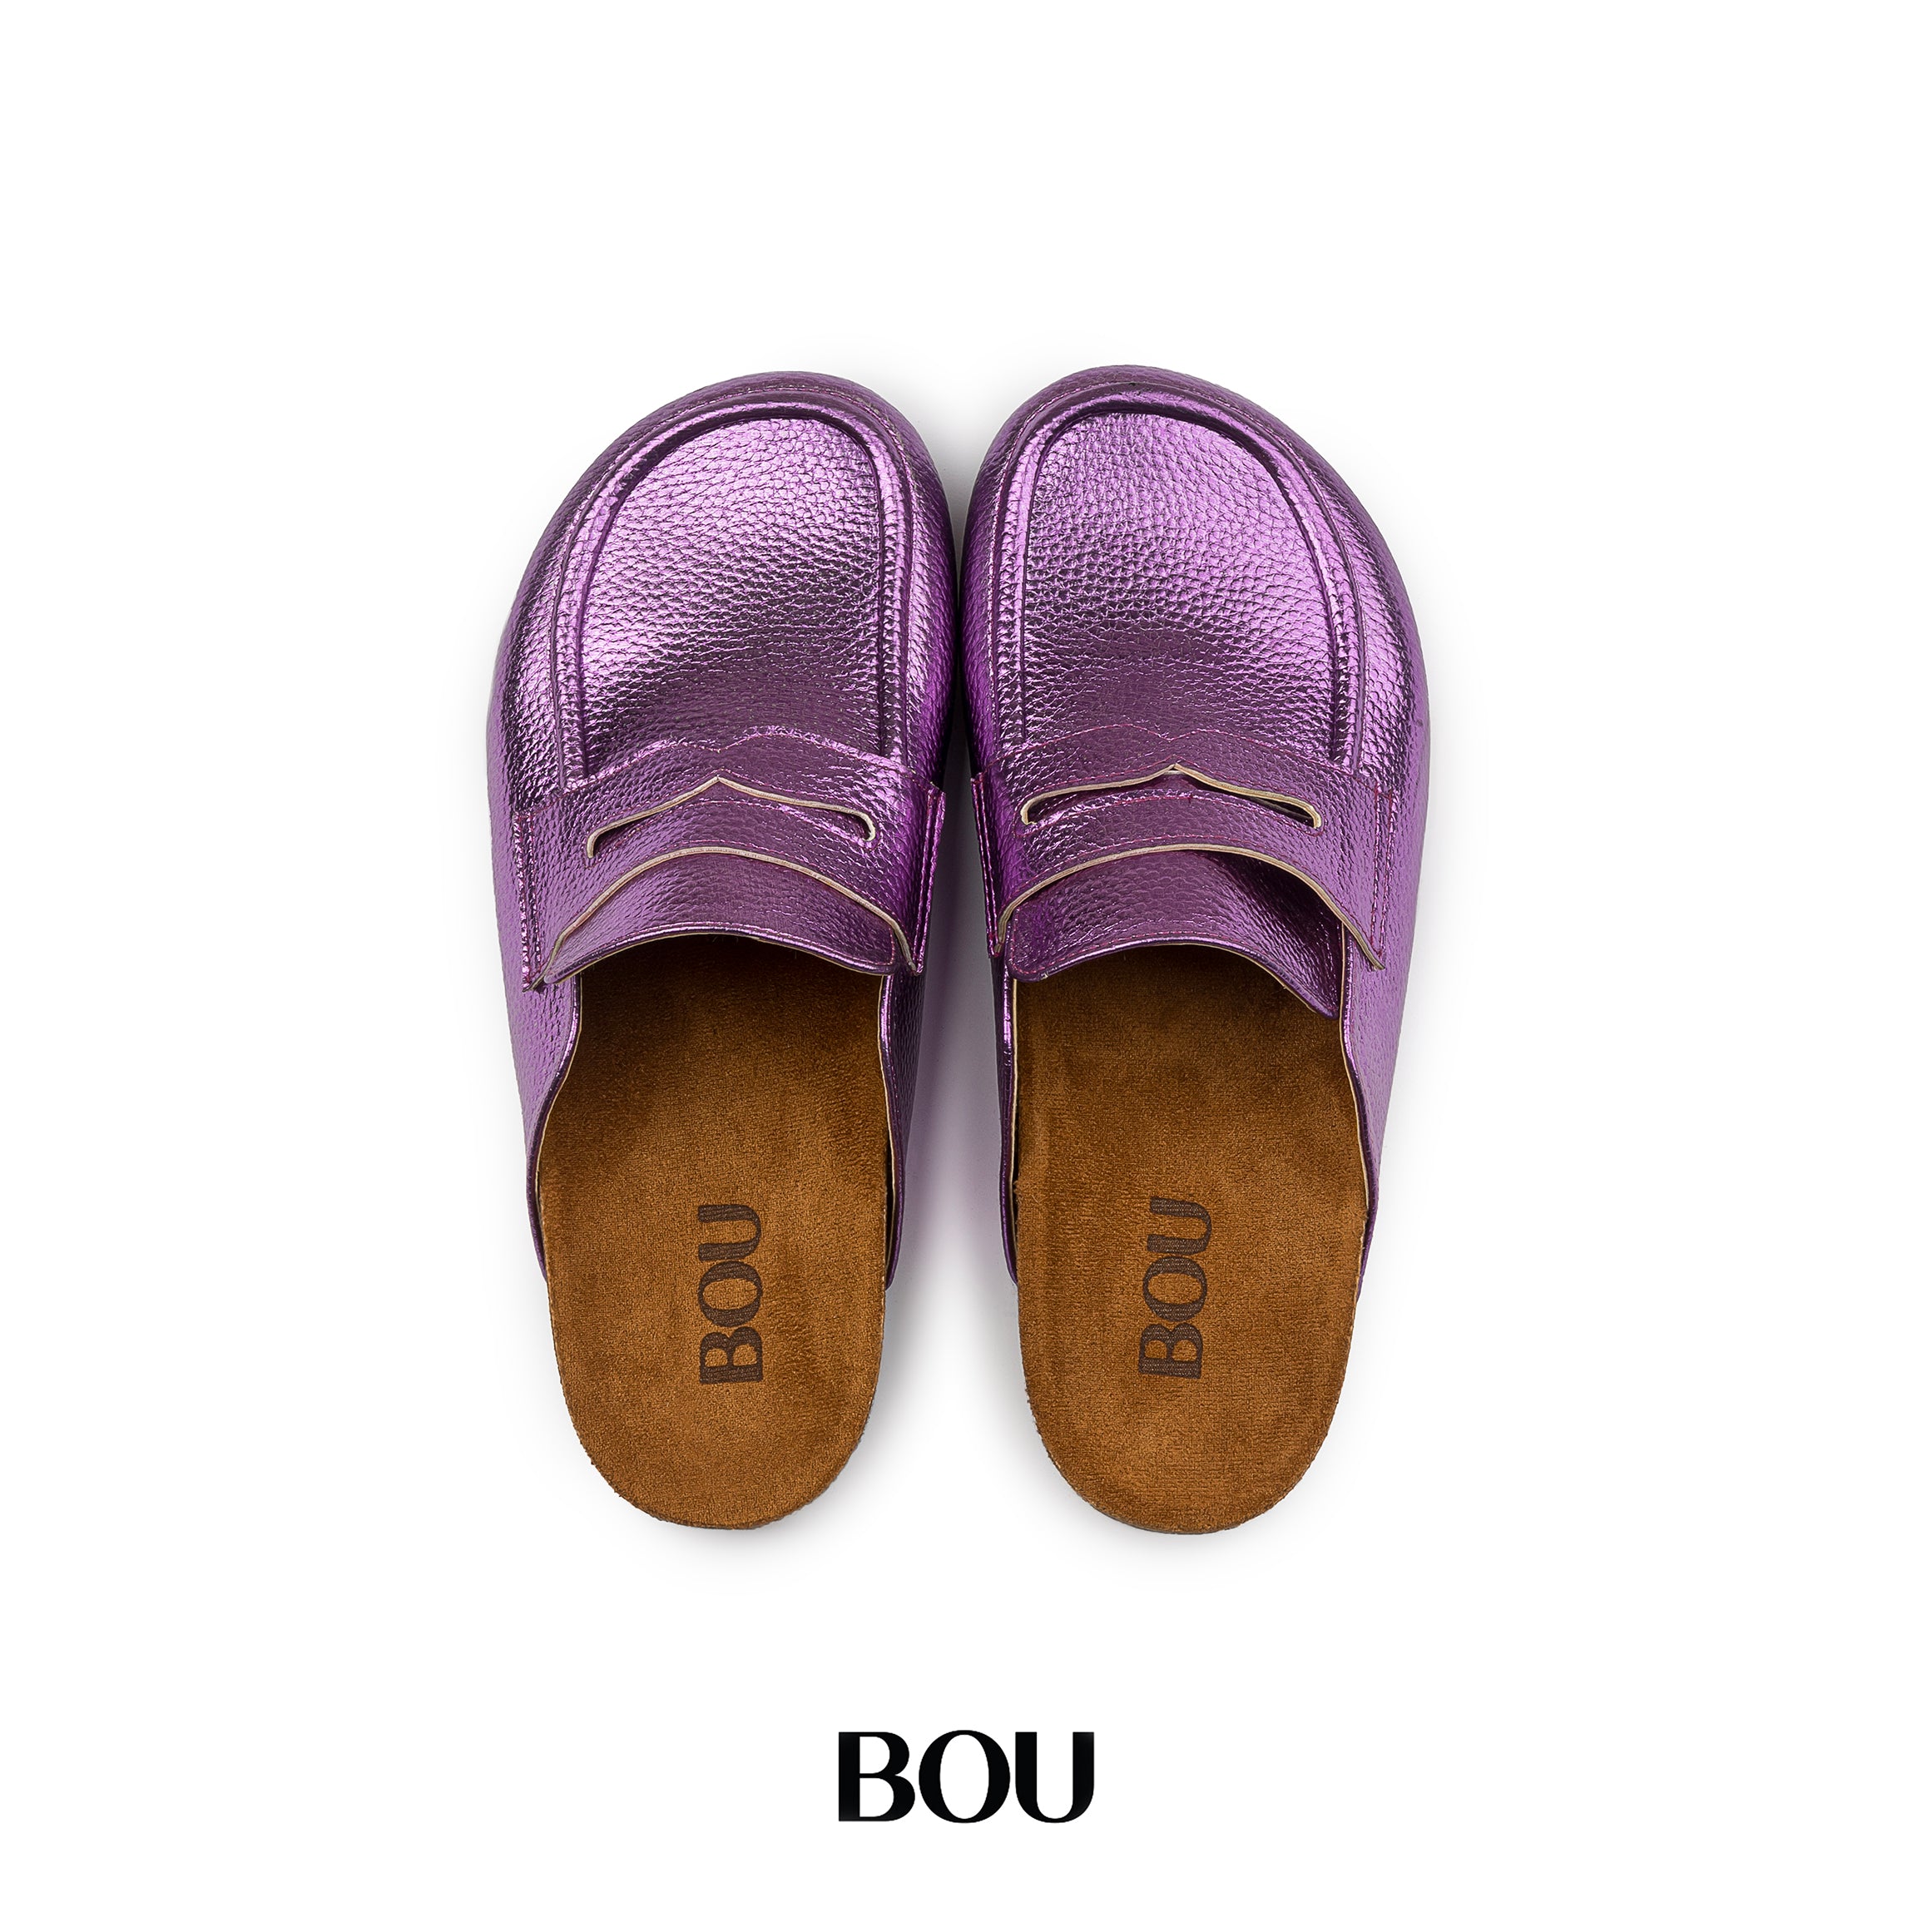 Loafer Clogs - Glowing Violet